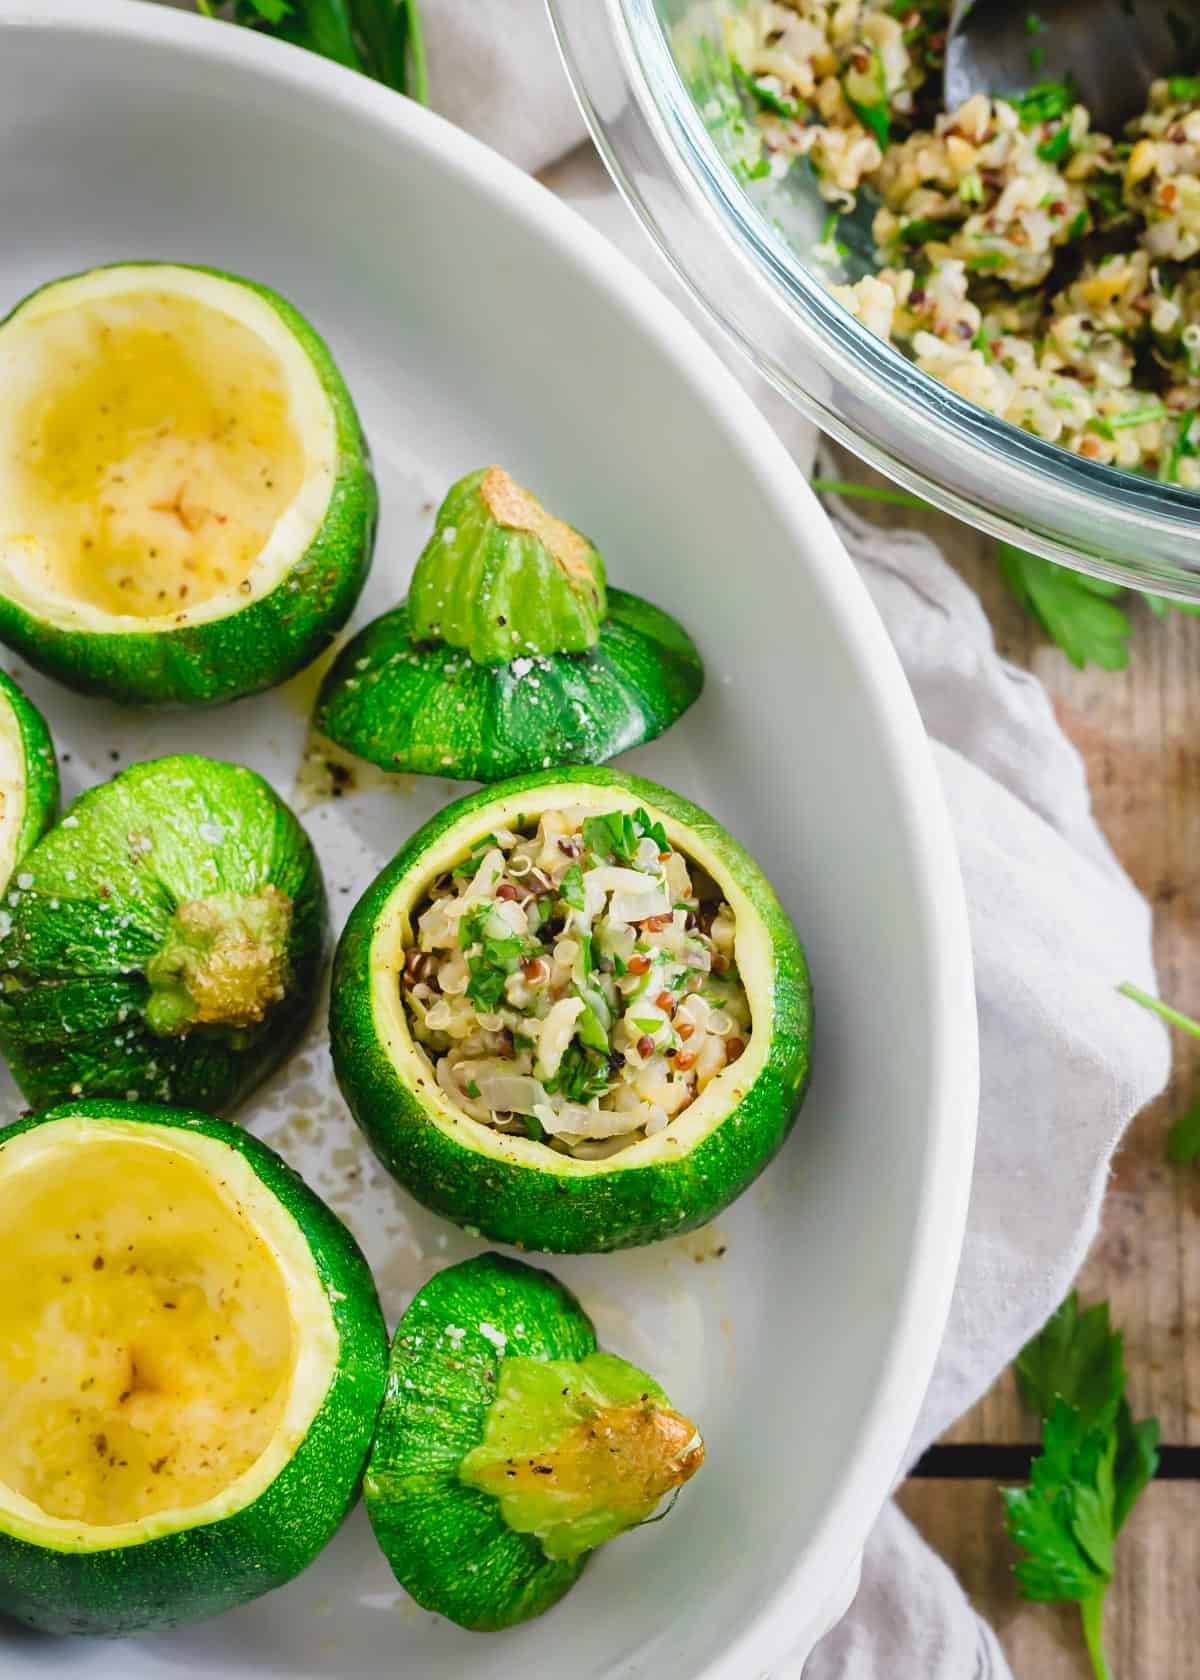 Easy recipe for baking round zucchini squash and stuffing with a vegetarian quinoa mixture.